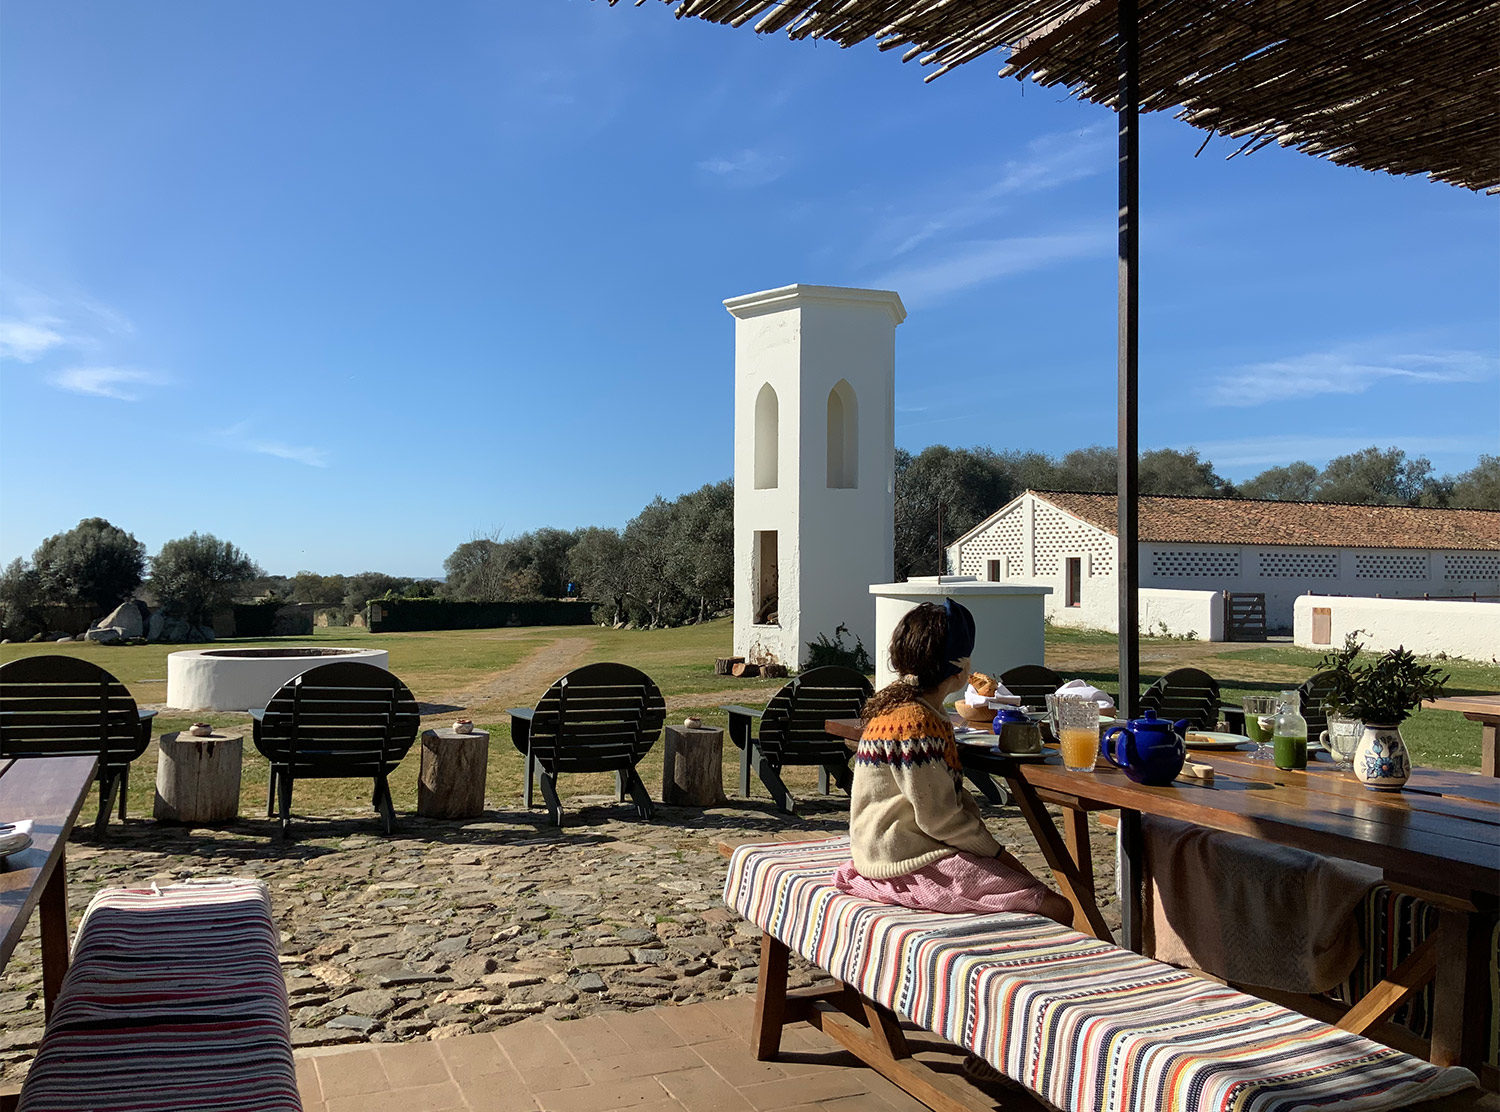 São Lourenço do Barrocal The open grassland plains offer wonderful space for children to play, or adults to picnic, and lead to the outdoor swimming pool and organic gardens. A large fire pit is lit up every evening and offers a beautiful place to gather